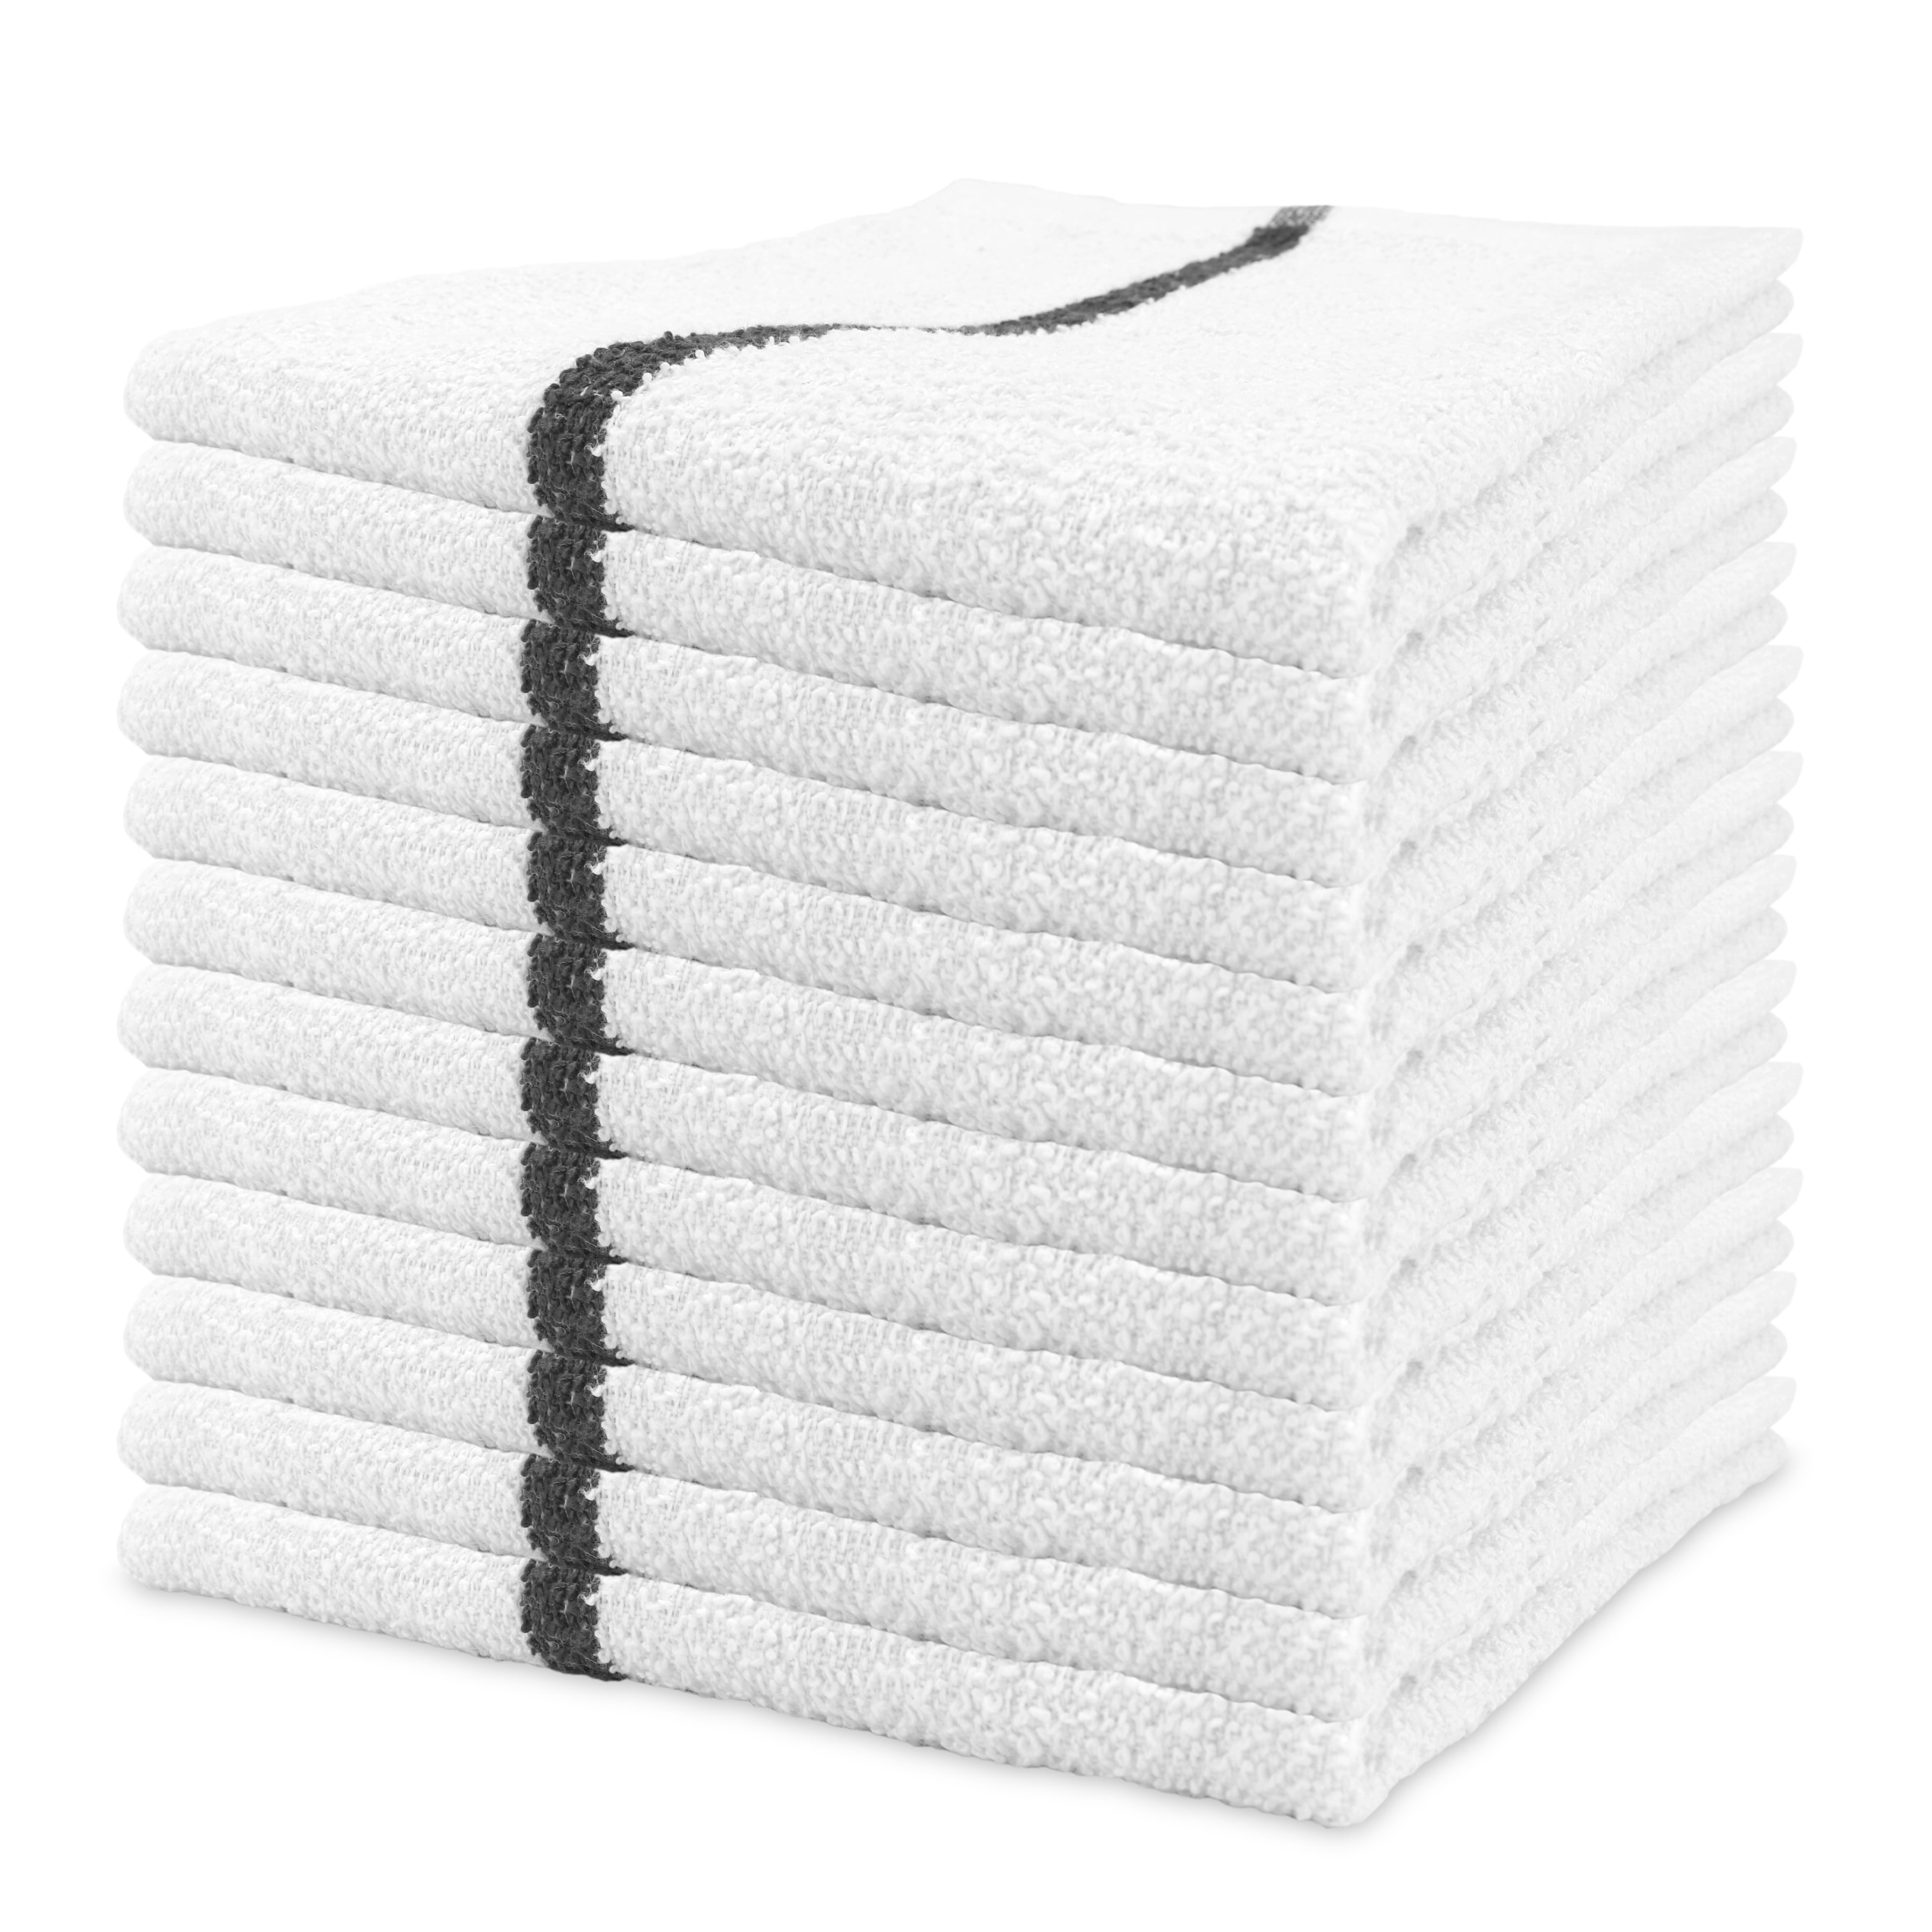 QUBA Linen - Bar Mops Towels, 12 Pack Premium Quality 100% Cotton, Size  16x19 Highly Absorbent and Multi-Purpose Cleaning Rags - Terry Towels for  Home